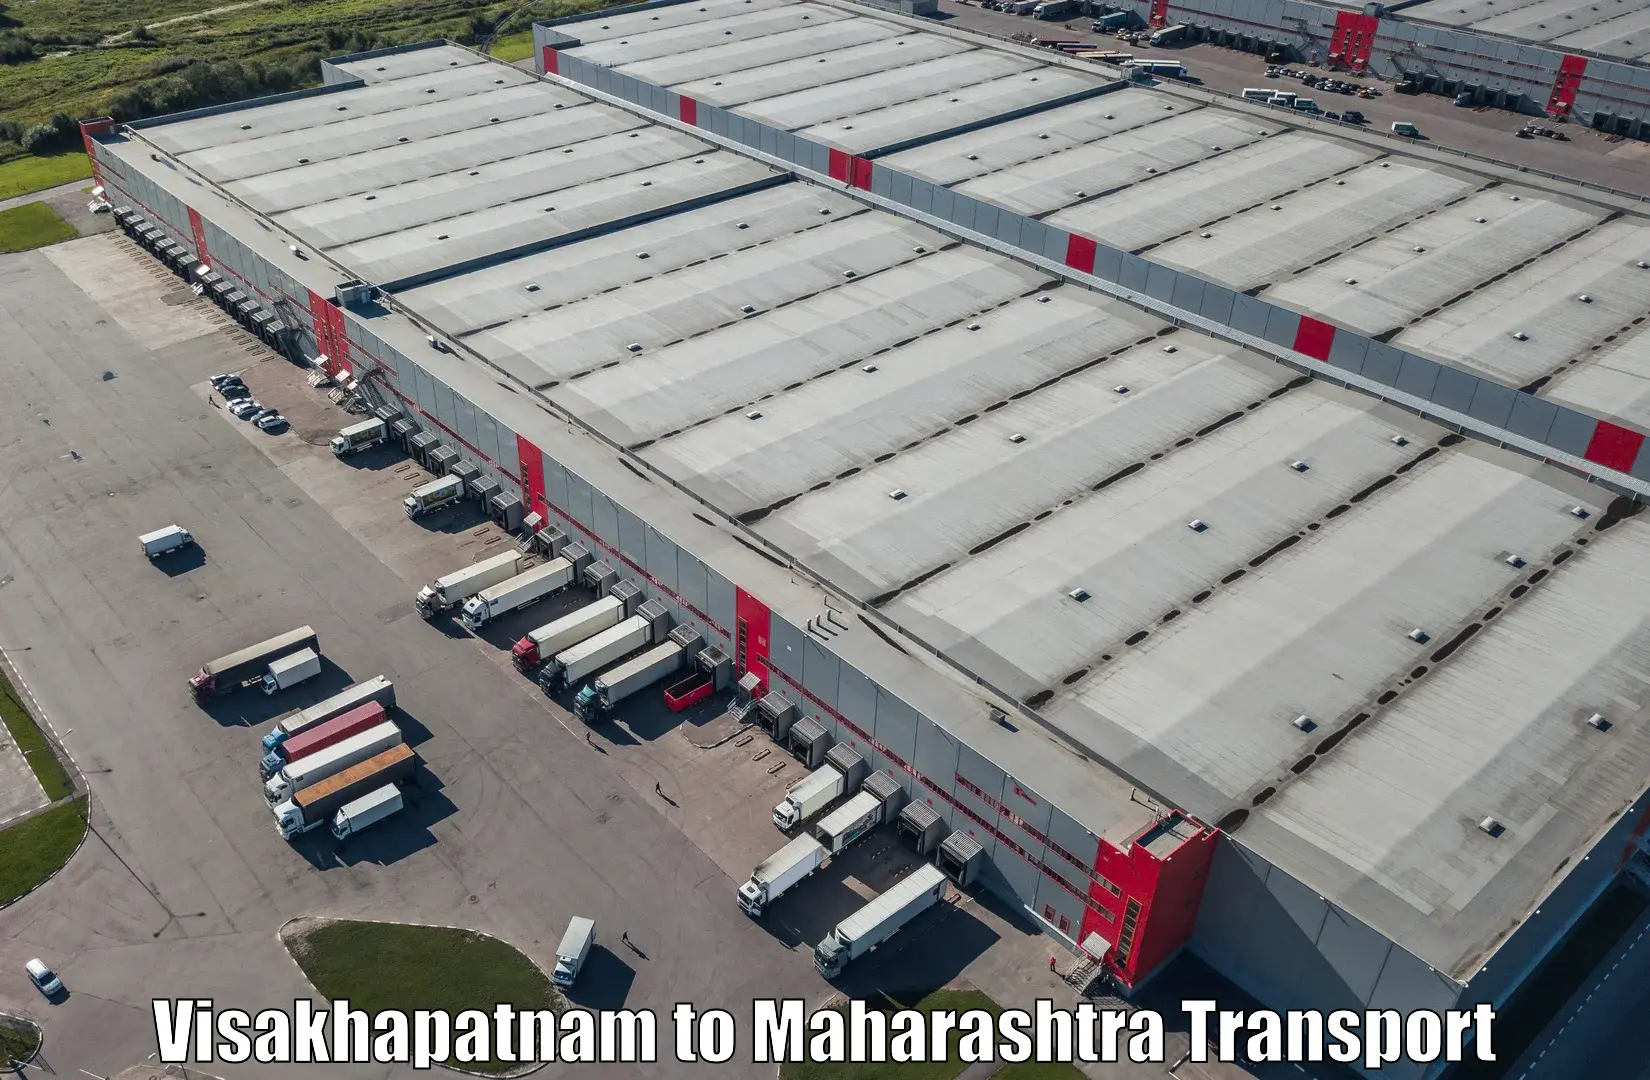 Truck transport companies in India in Visakhapatnam to Karad